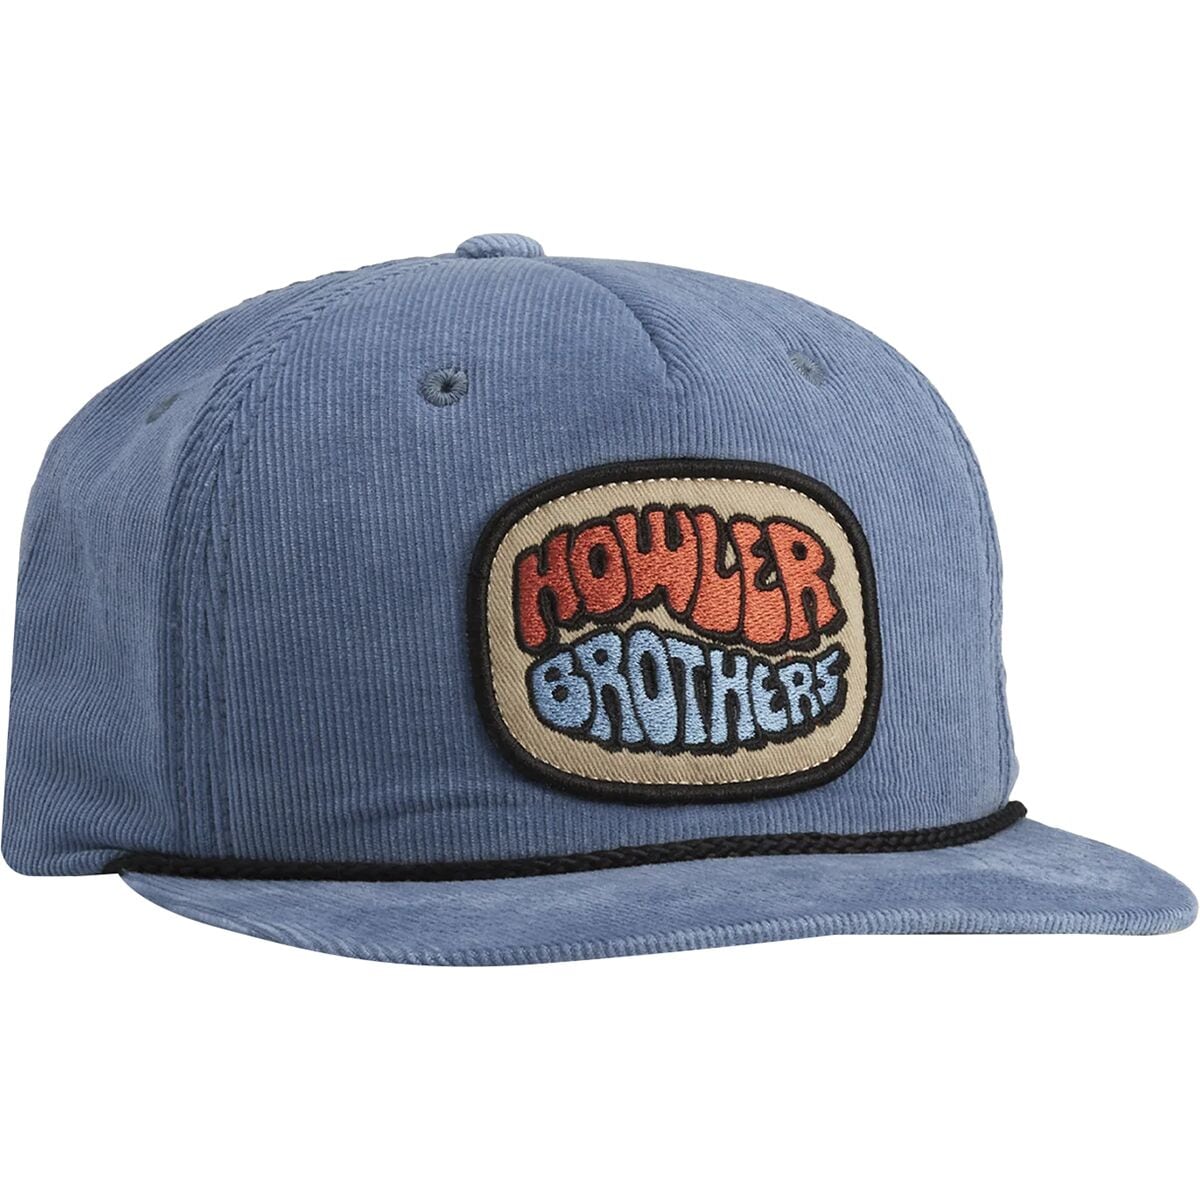 Howler Brothers Bubble Gum Structured Snapback Hat